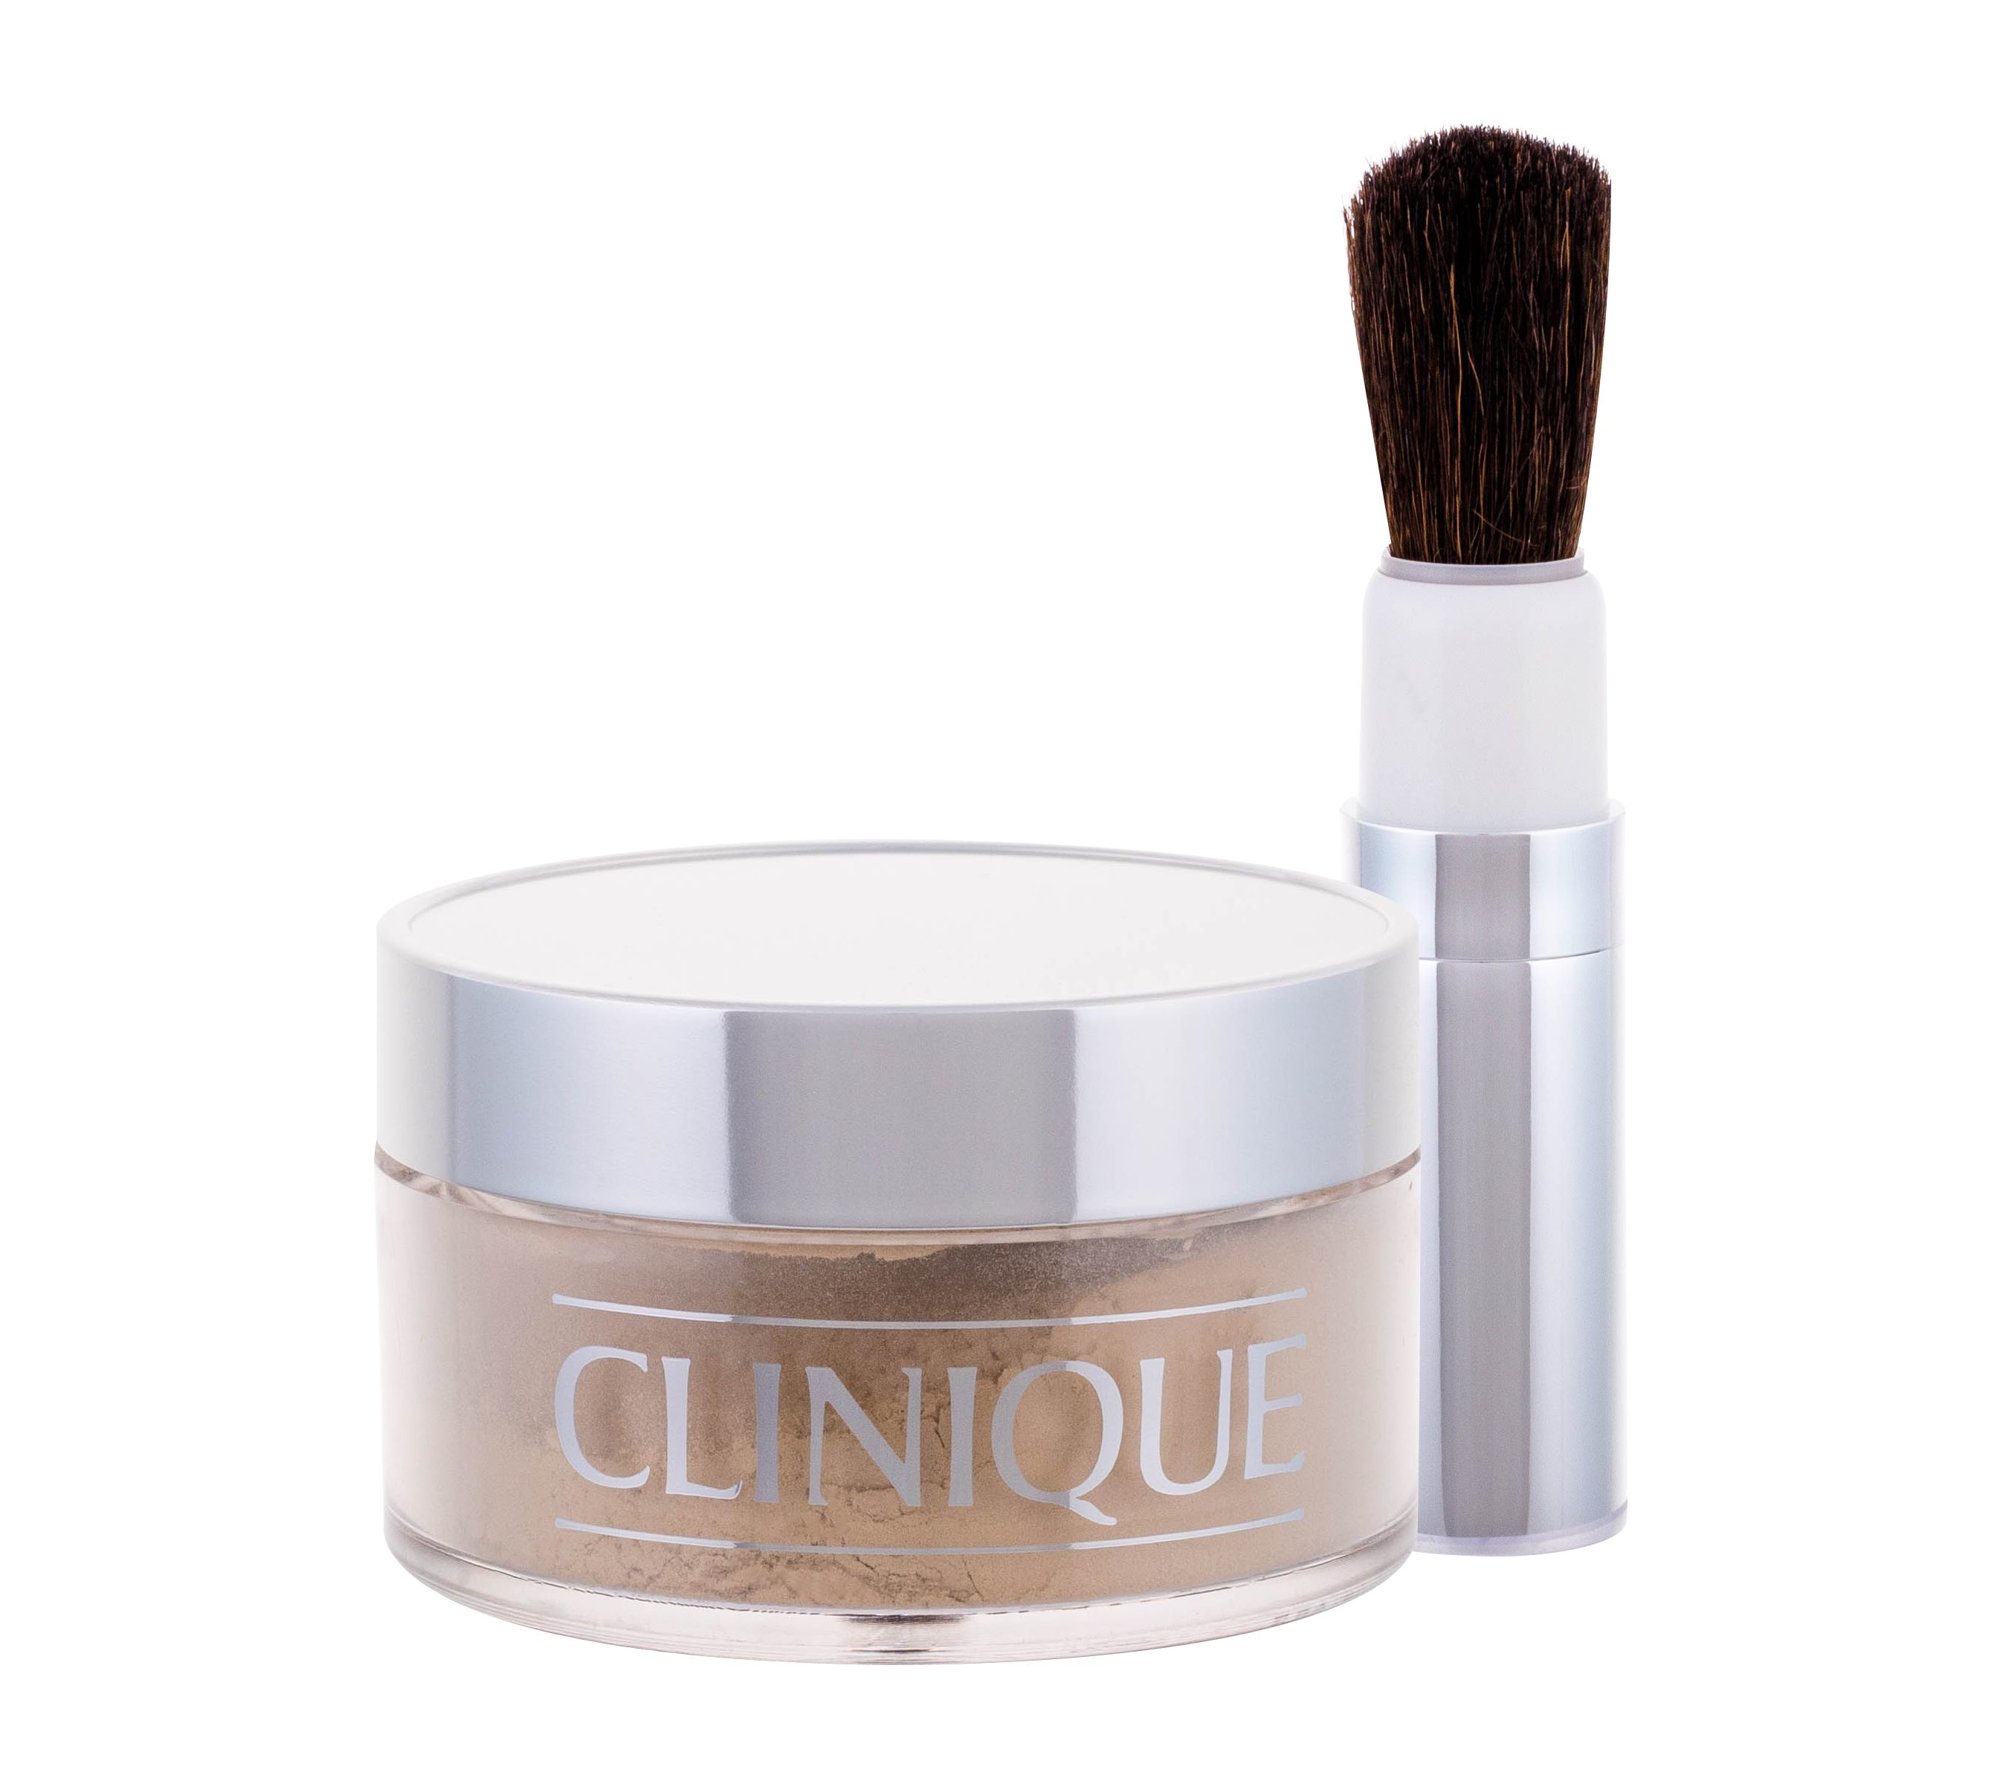 Clinique Blended Face Powder And Brush 35g sausa pudra